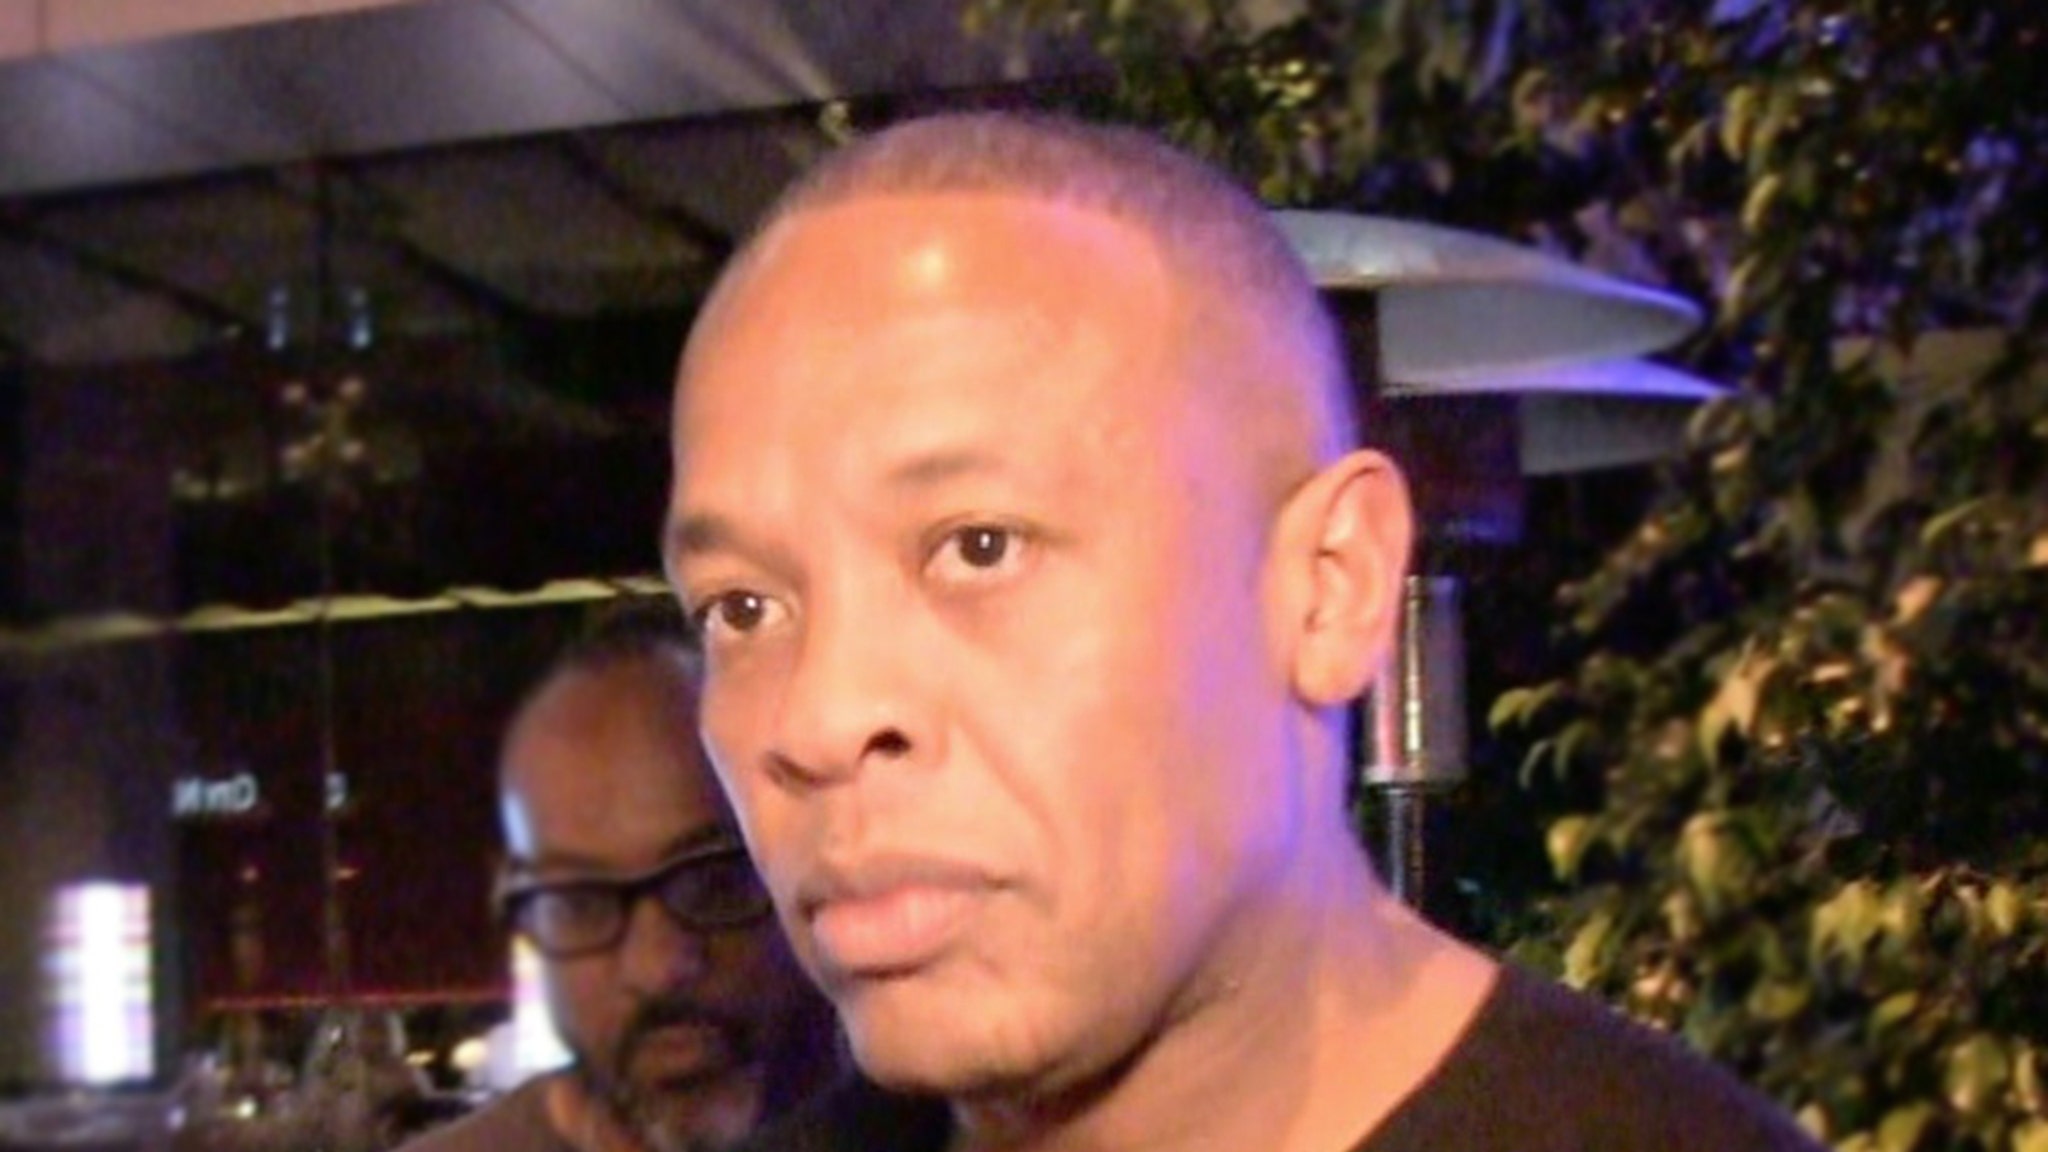 Dr. Dre is still in the ICU almost a week after the cerebral aneurysm